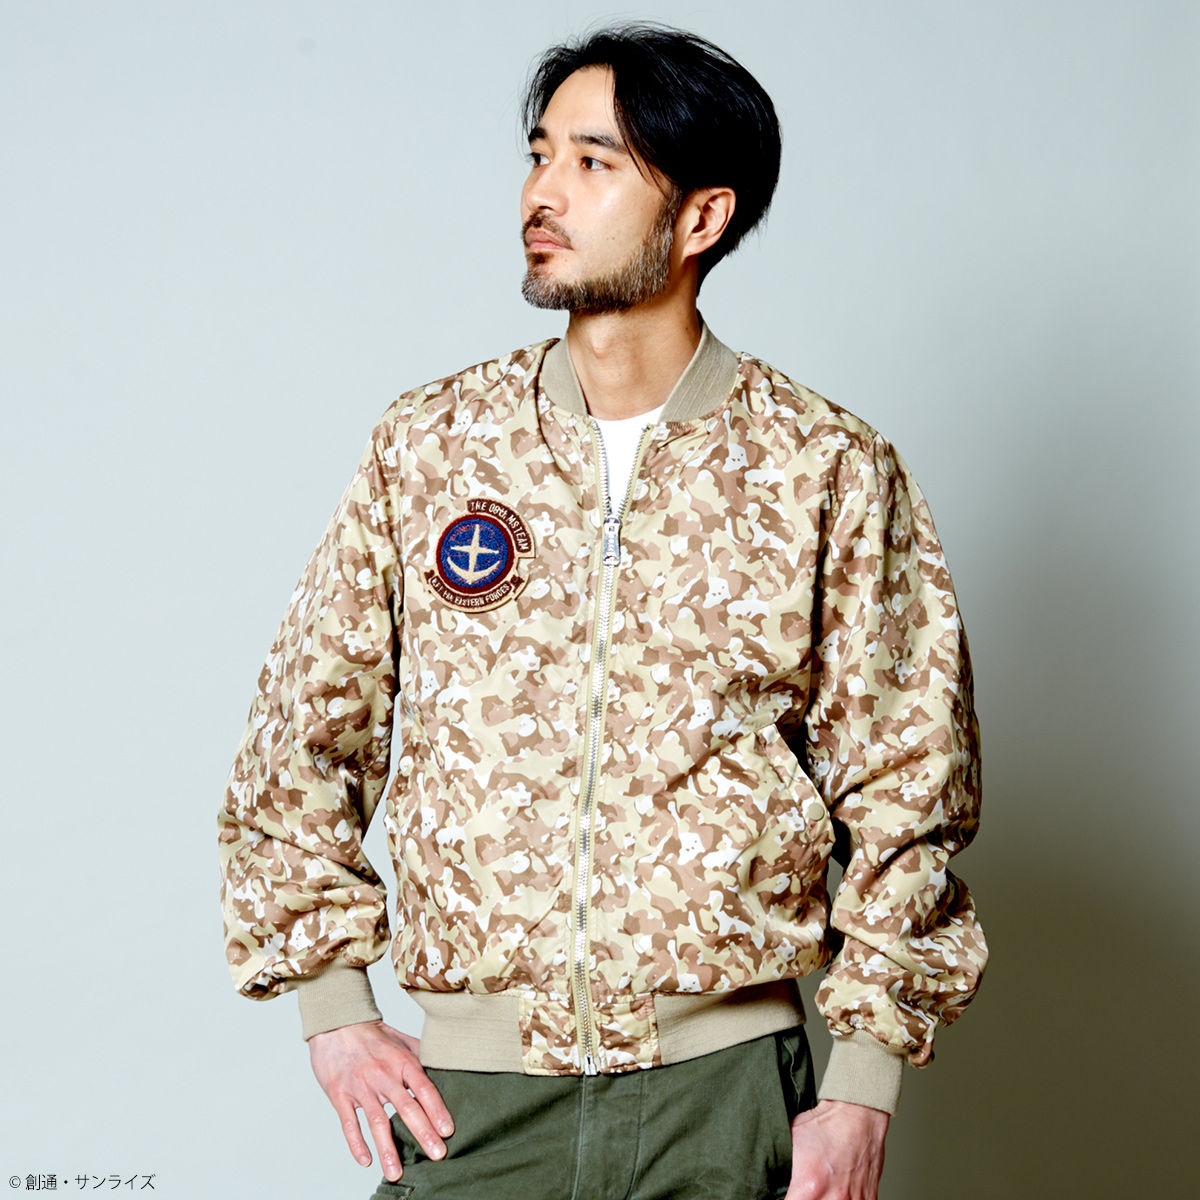 STRICT-G x ALPHA Light MA-1 Bomber Jacket - Mobile Suit Gundam: The 08th MS Team 08th Team Version